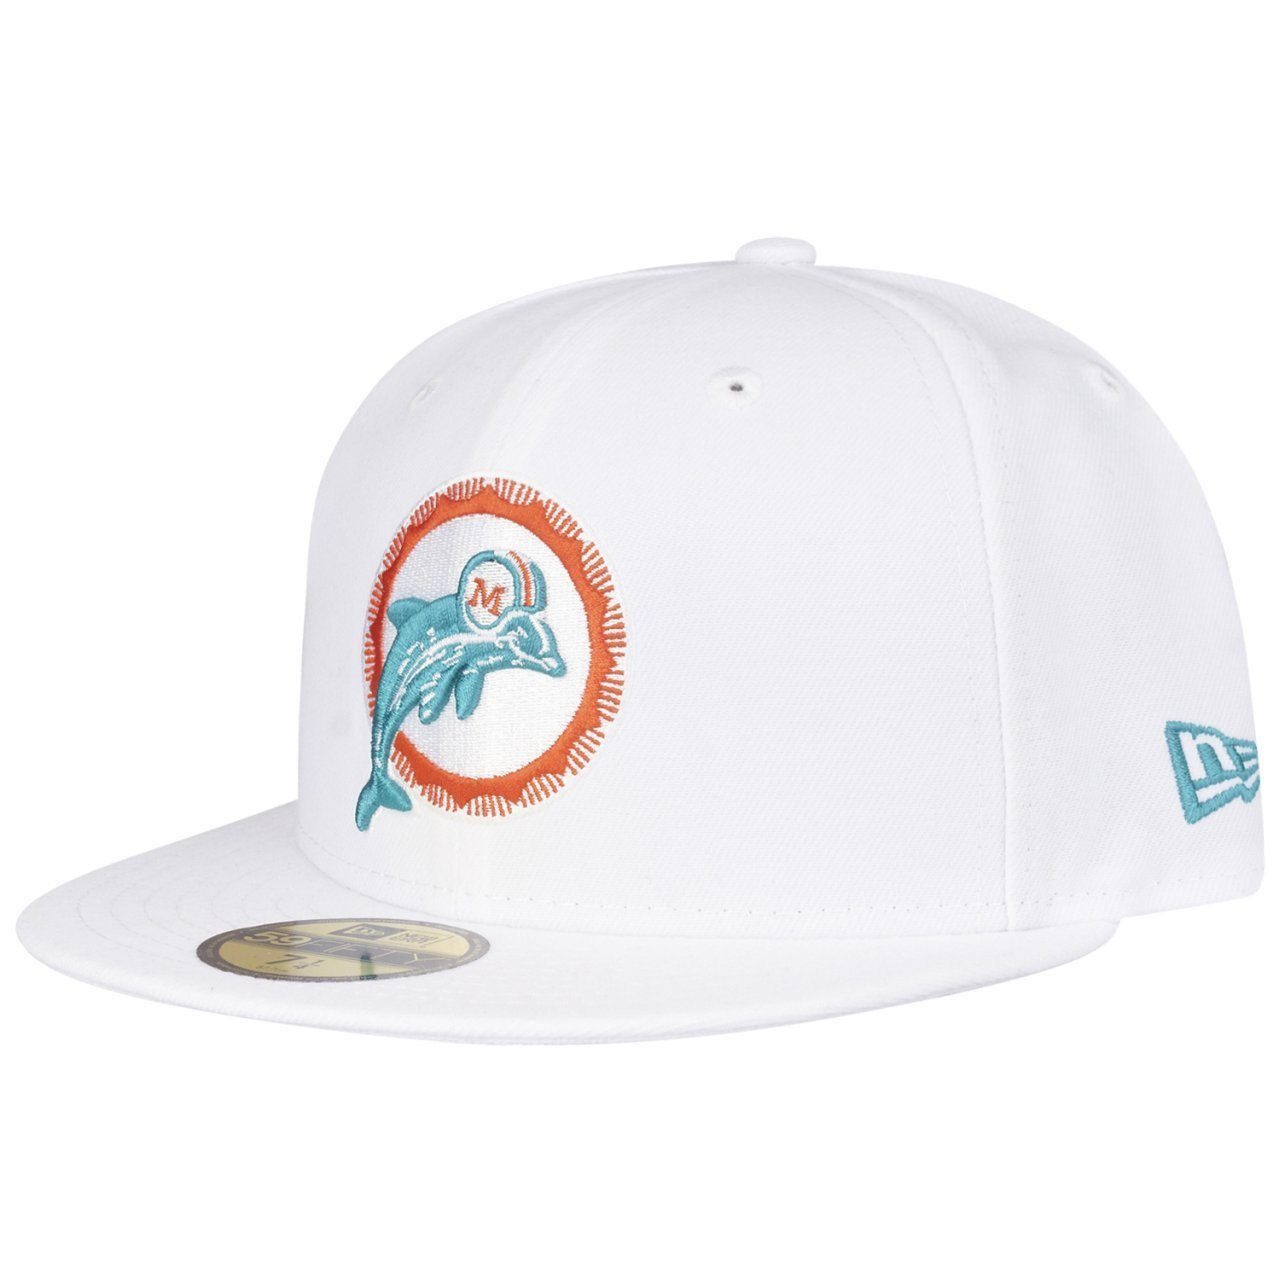 New Era Fitted Cap 59Fifty NFL RETRO Miami Dolphins